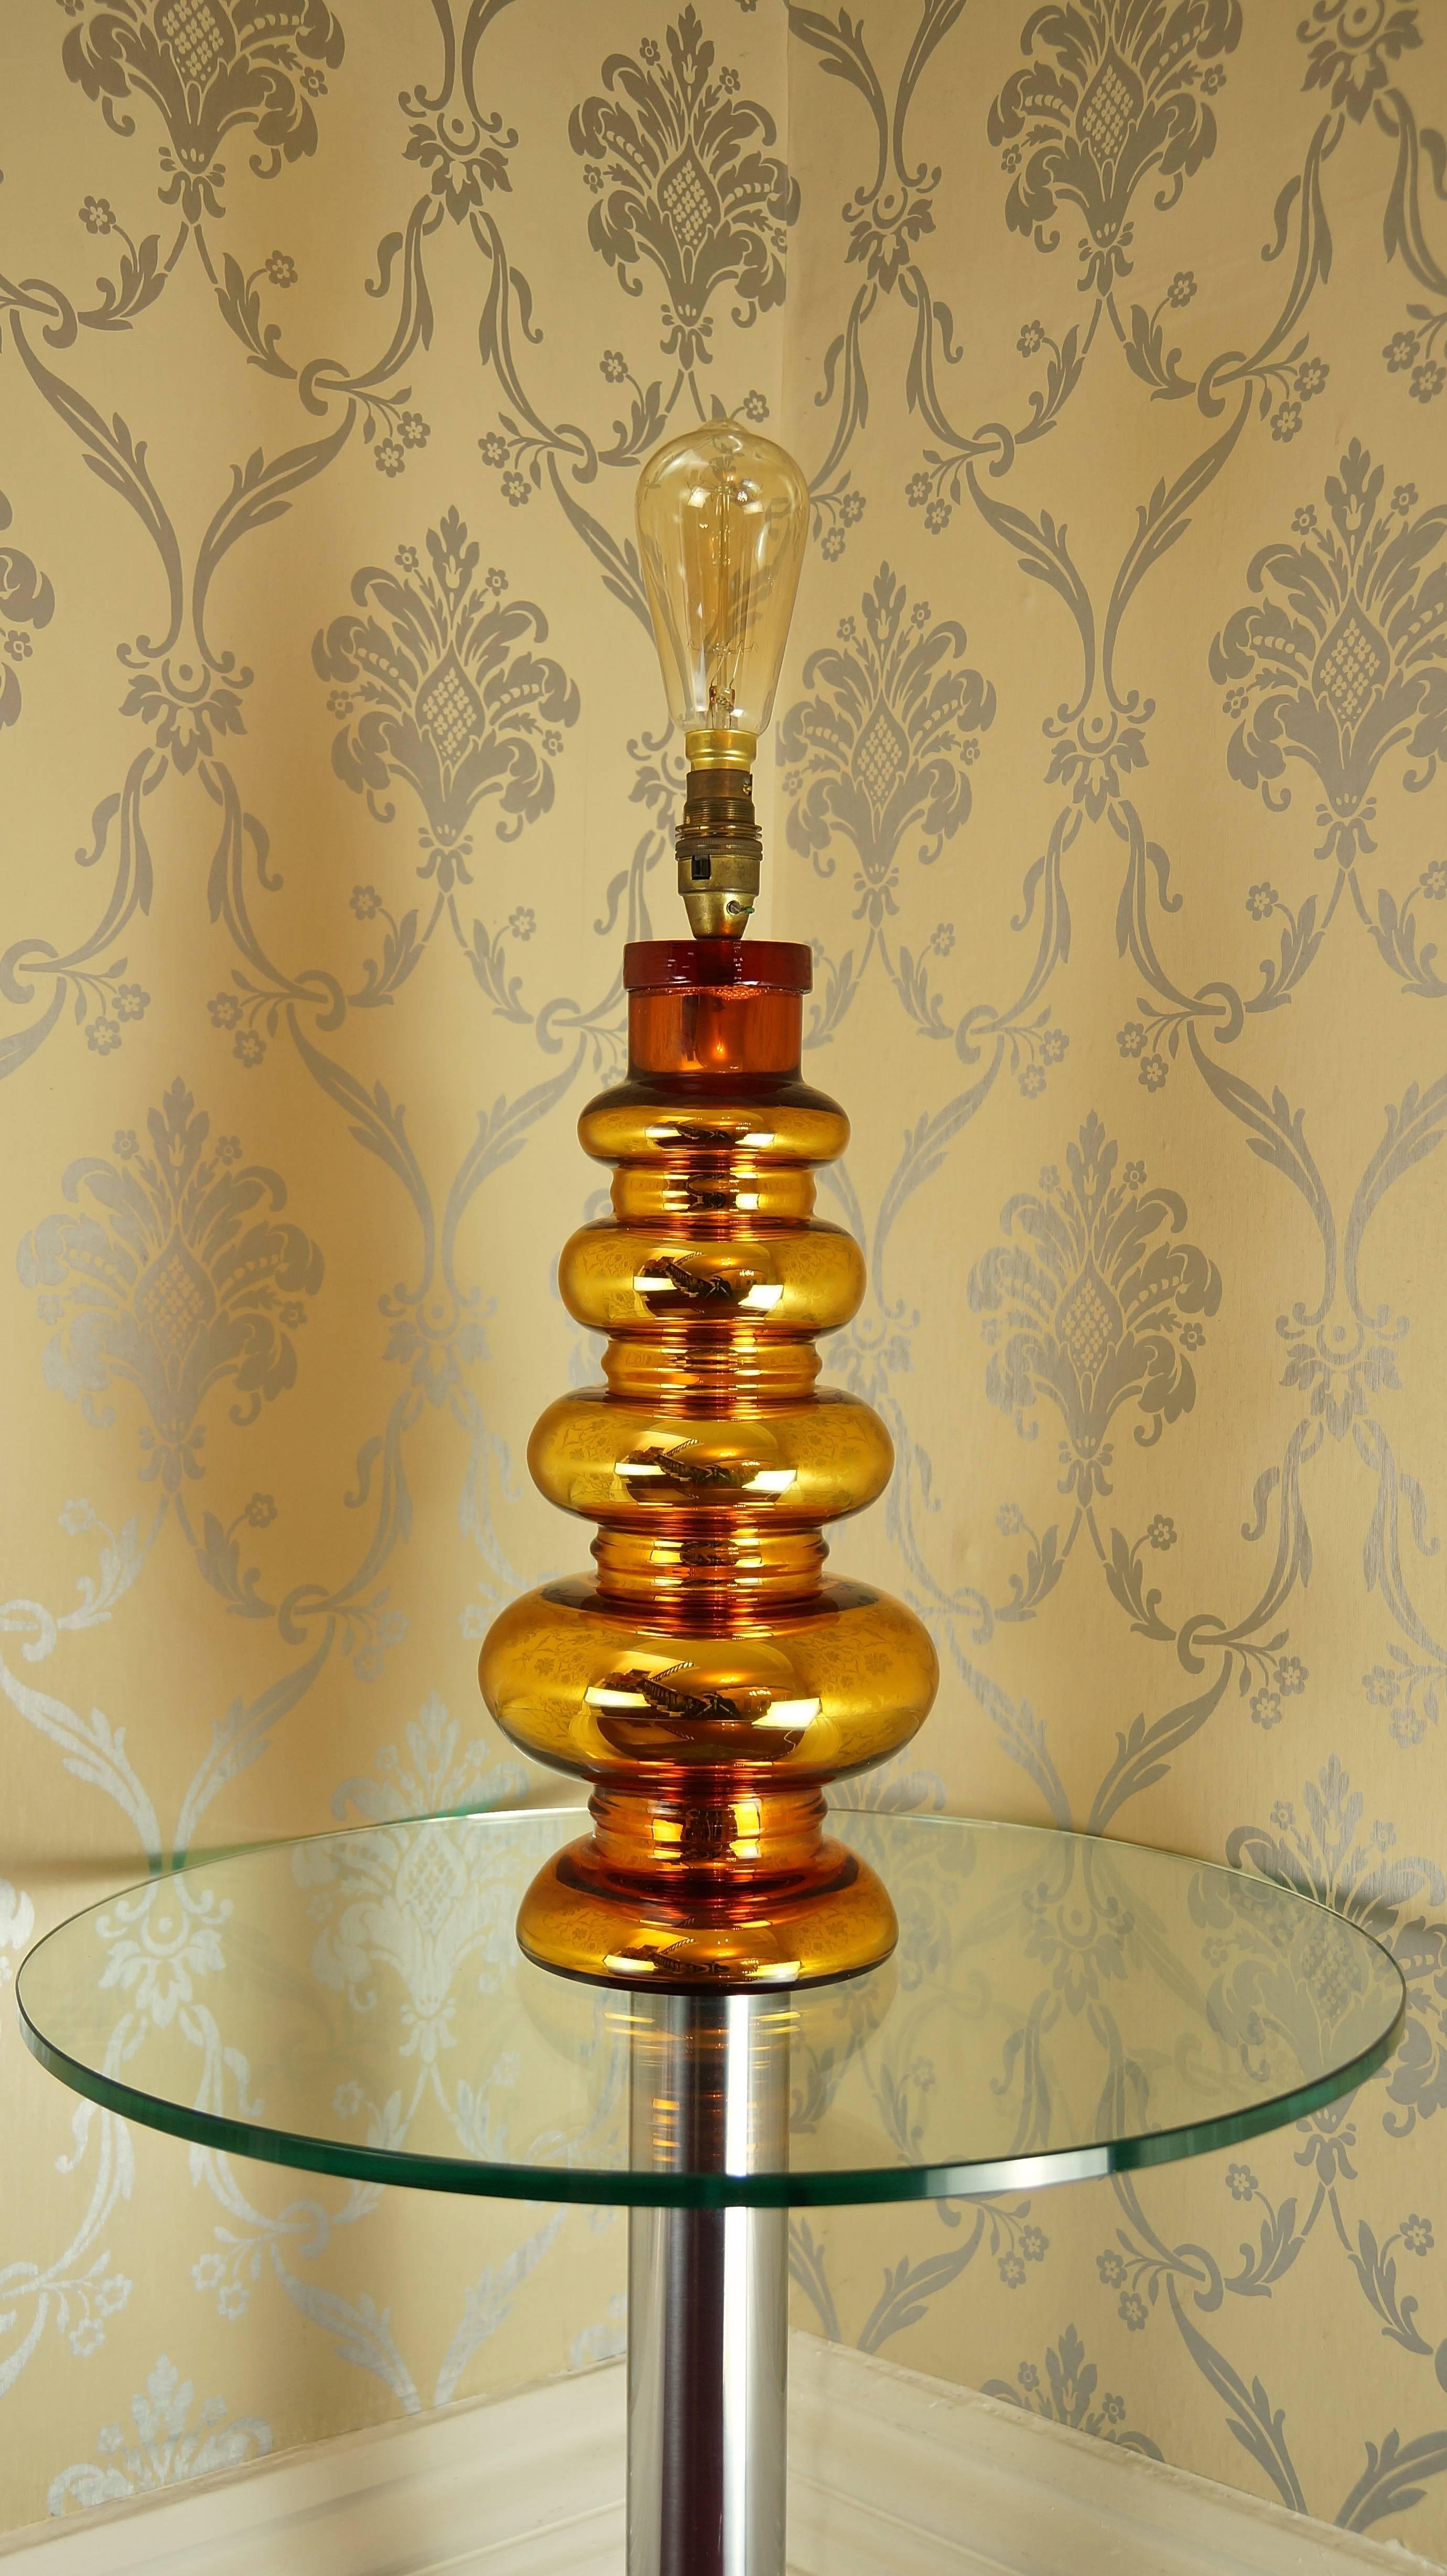 A beautifully crafted gold coloured mercury glass table lamp, with signature textured glass cap by Johansfors Glasbruk of Sweden dating from the 1960s.

The glamorous gold colour and incredible form of this lamp make it a very eye-catching piece